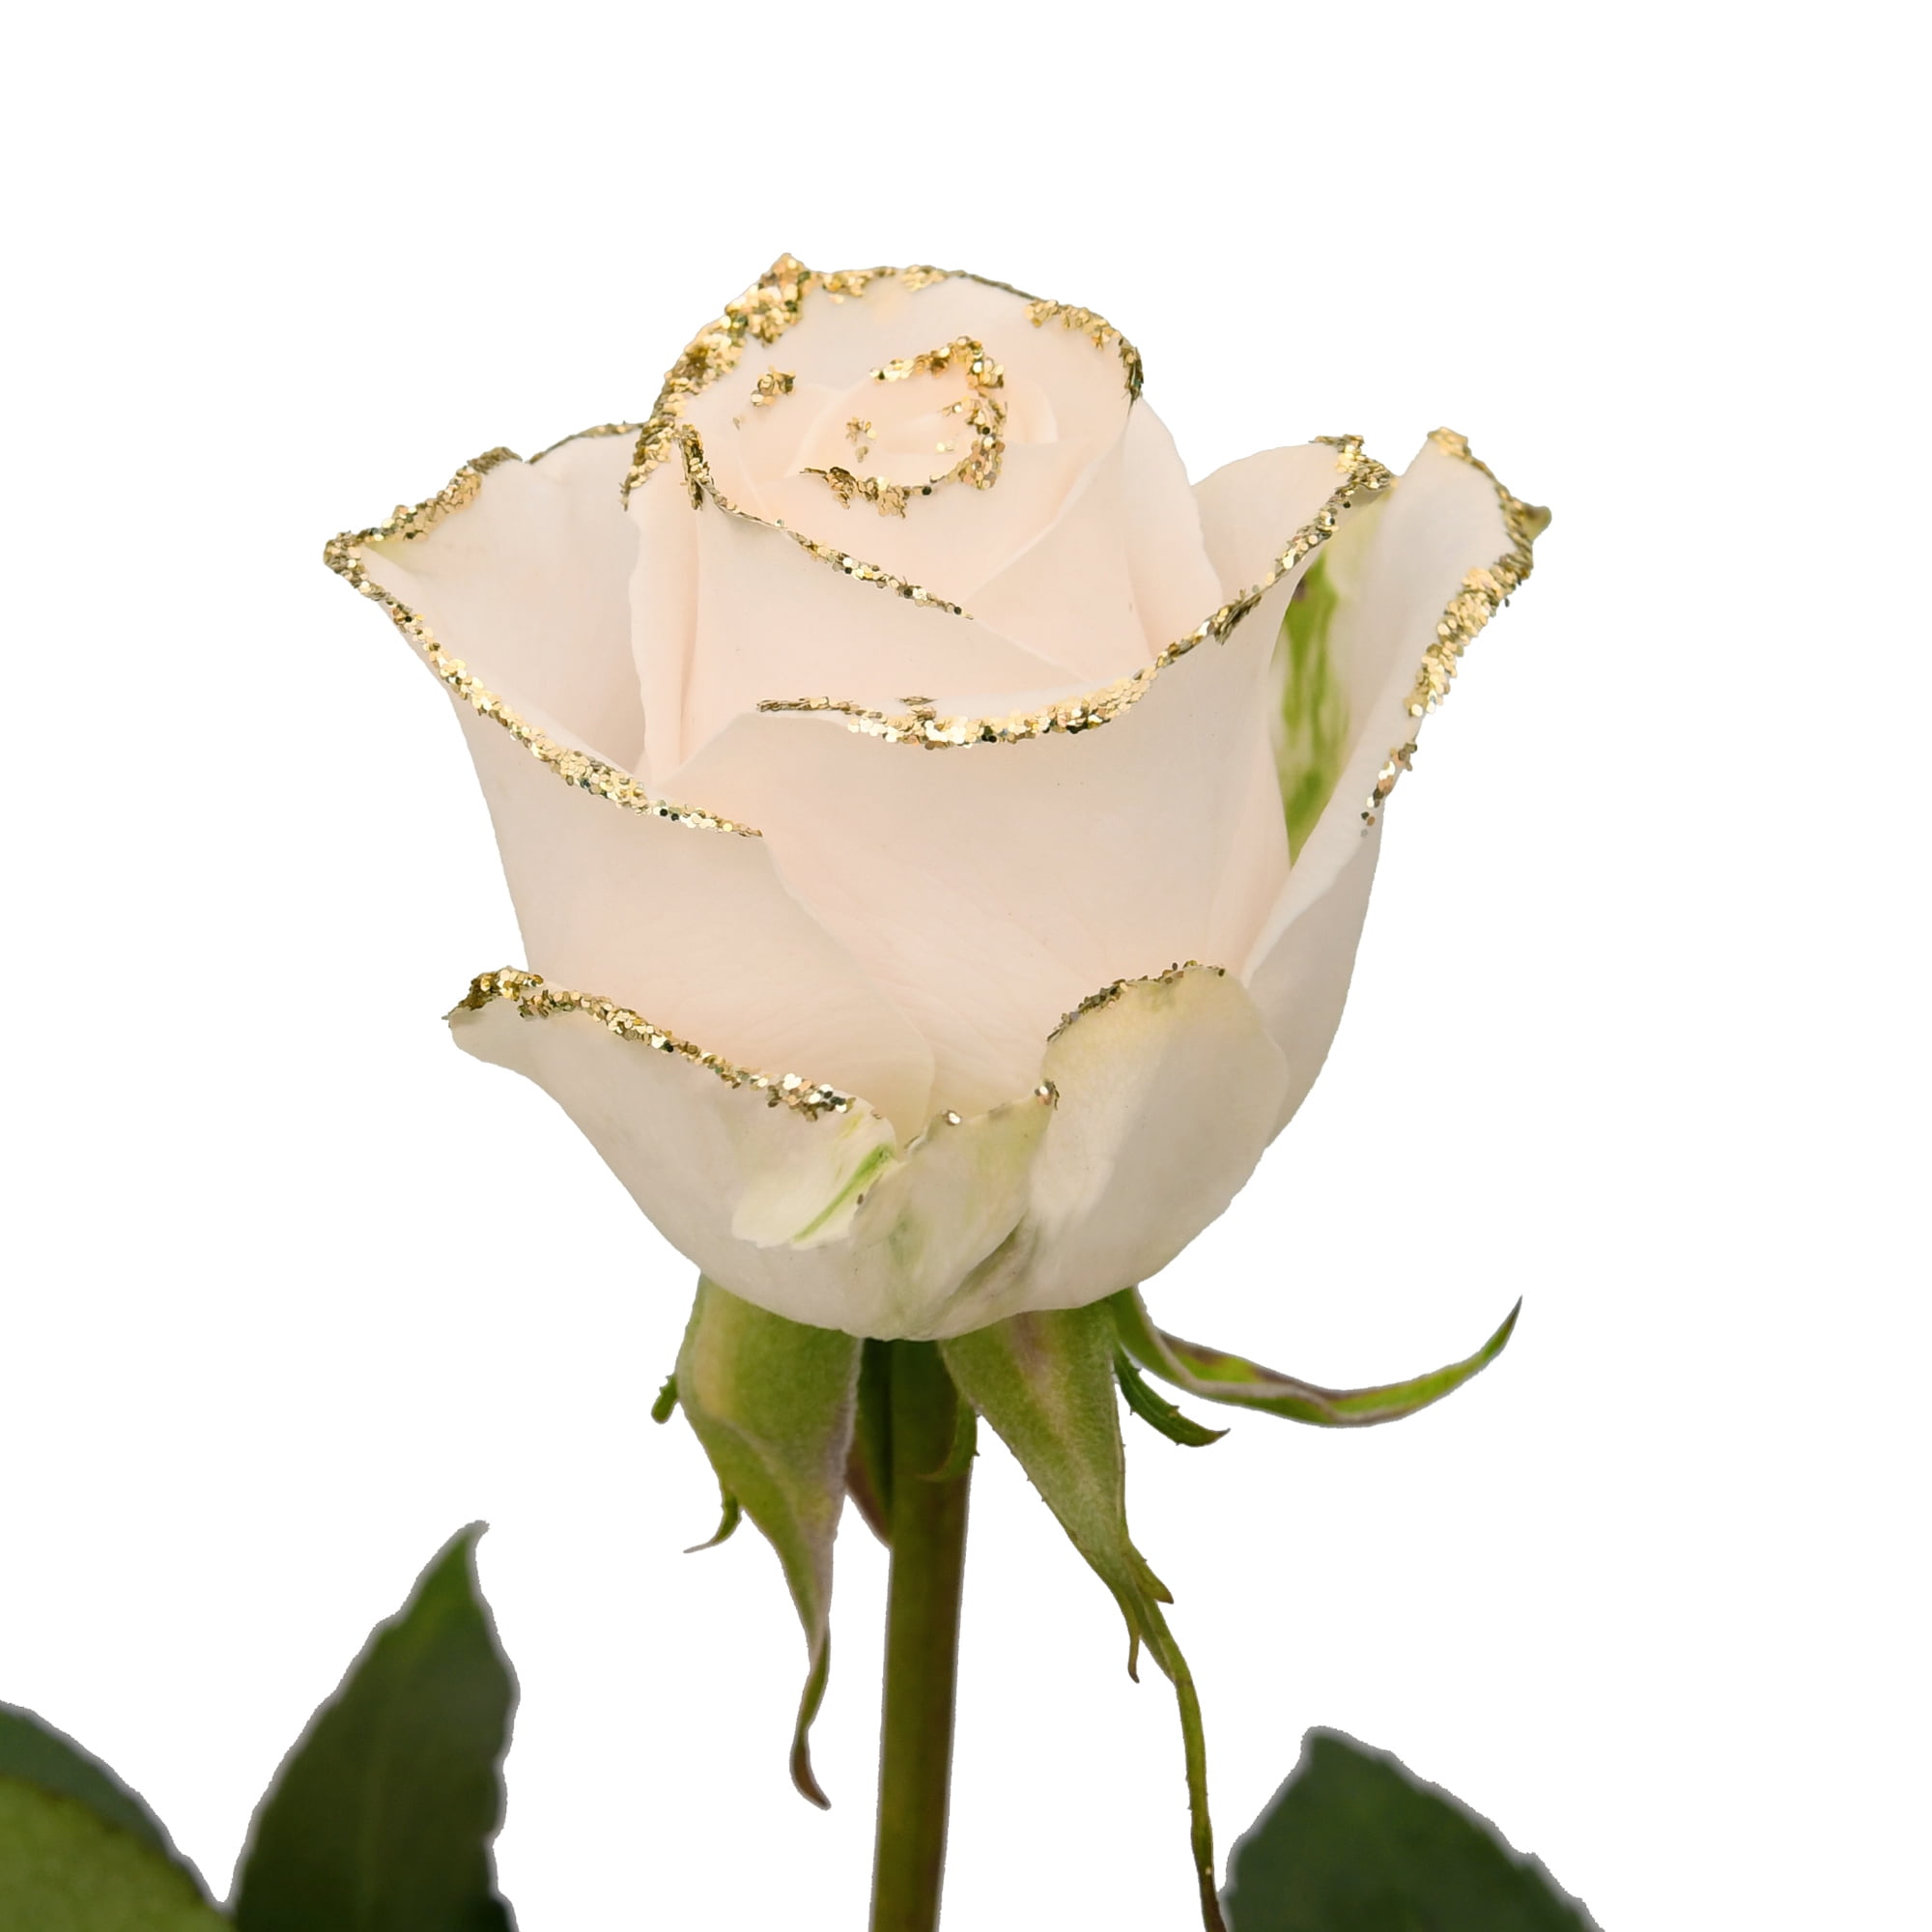 Roses 50 Stems of White Farm Direct Fresh Cut Flowers with Hand Painted  Gold Glitter on the Bloom Tips by Bloomingmore 